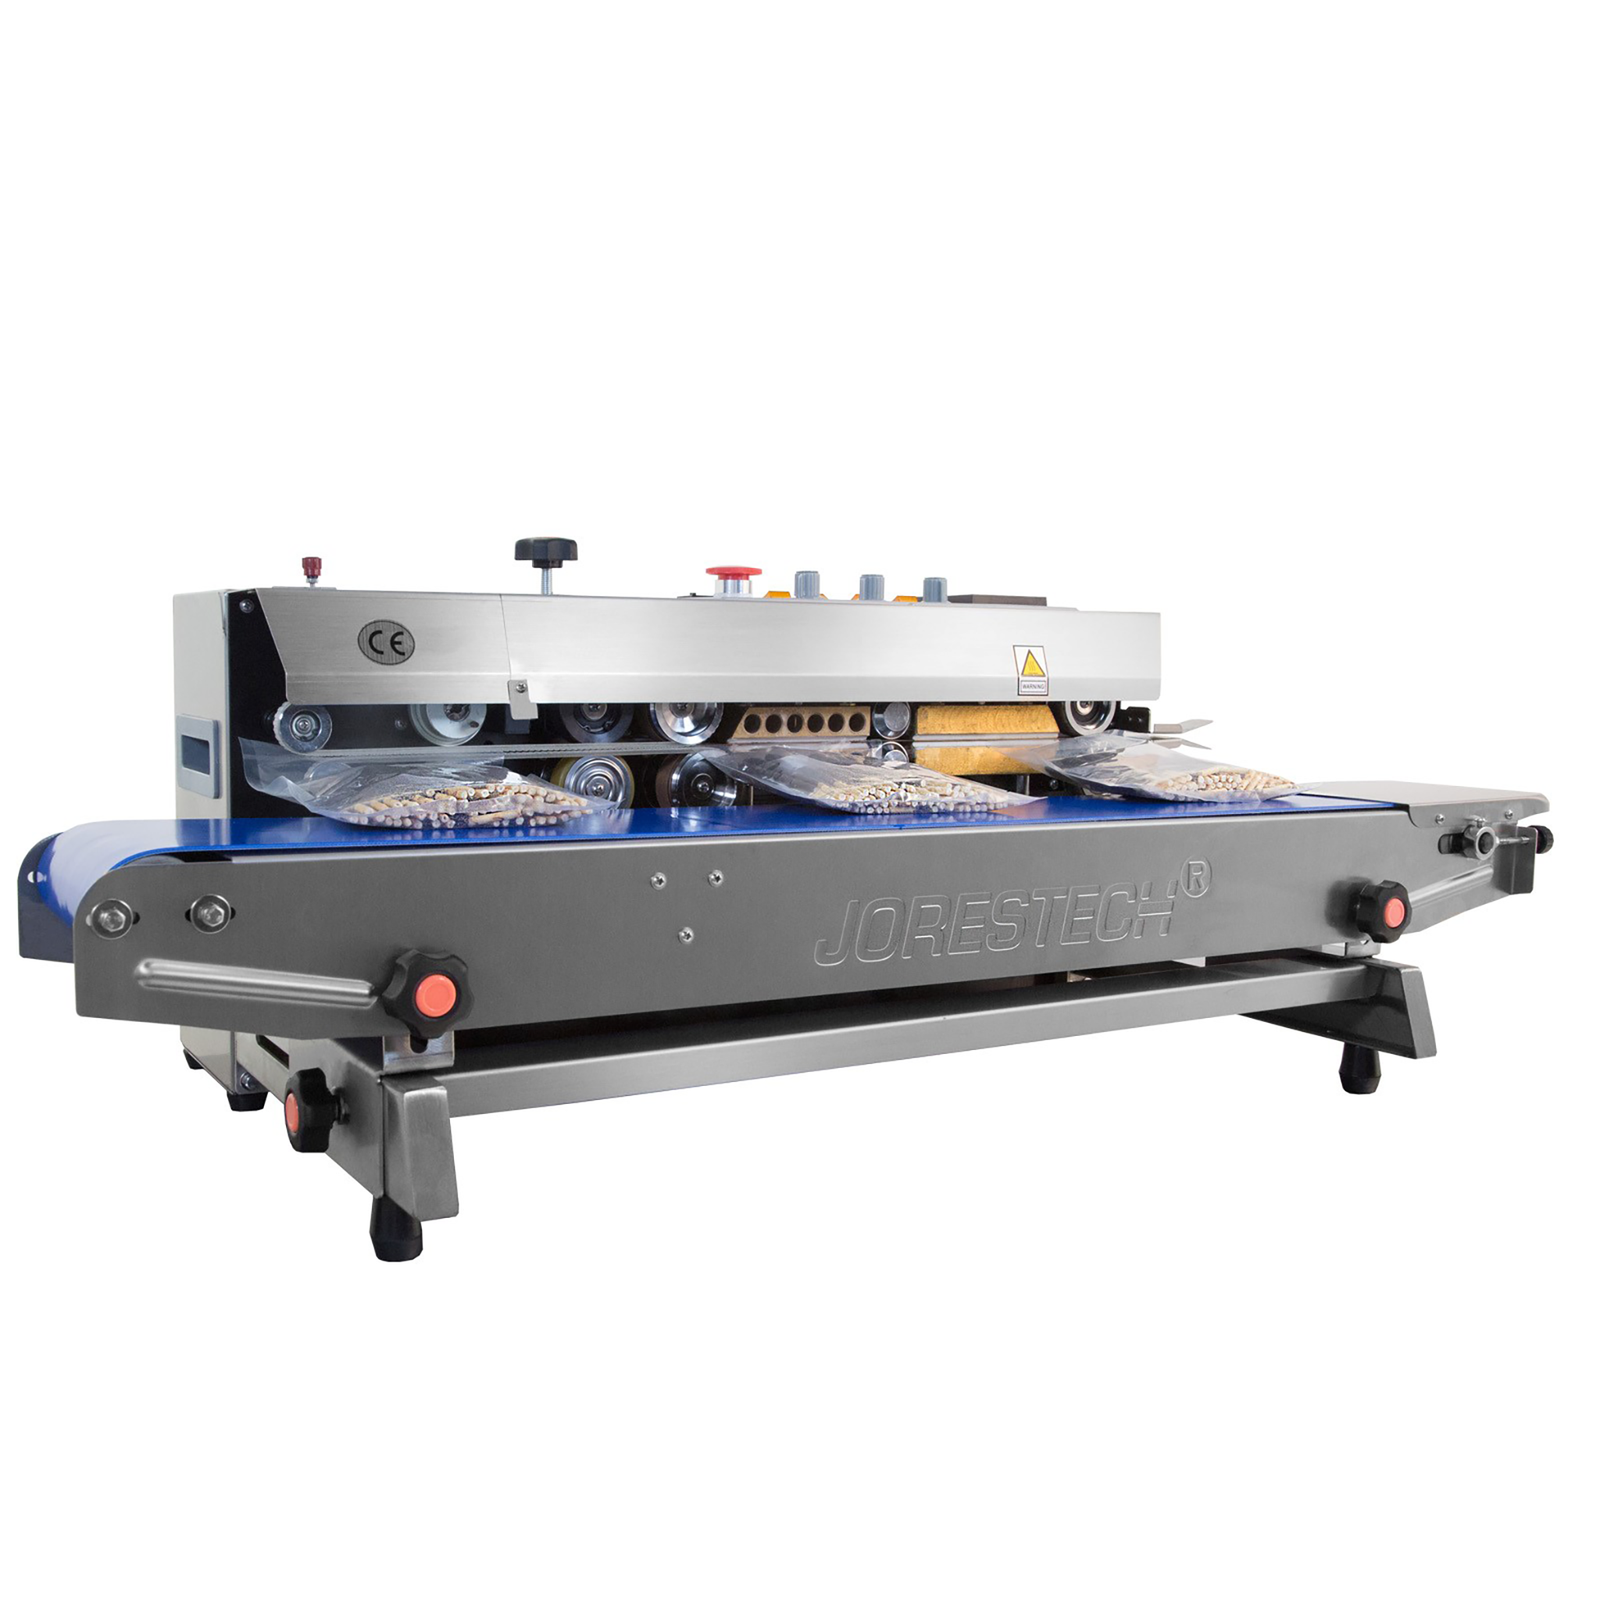 JORES TECHNOLOGIES® Continuous band sealer with coder is set in an horizontal while sealing bags filled with product.